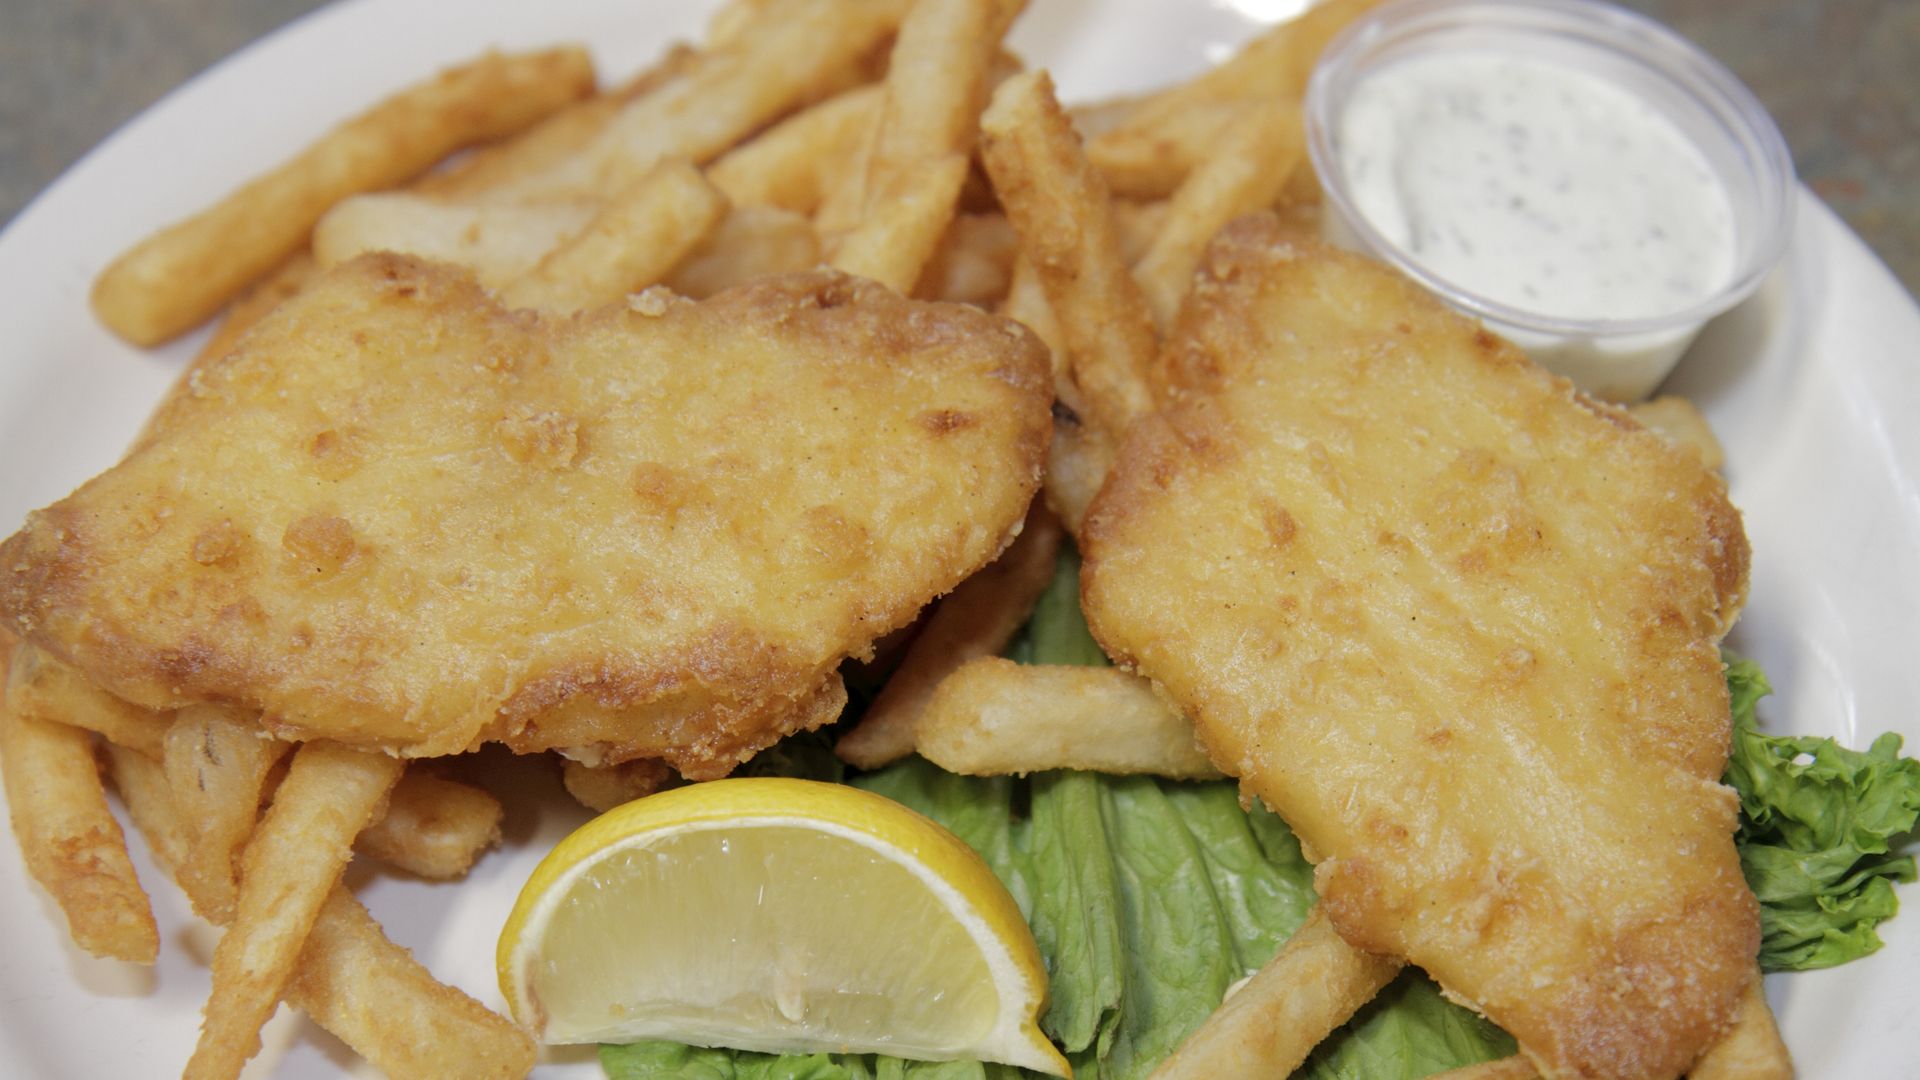 Fried fish with fries, a lemon wedge and tartar sauce